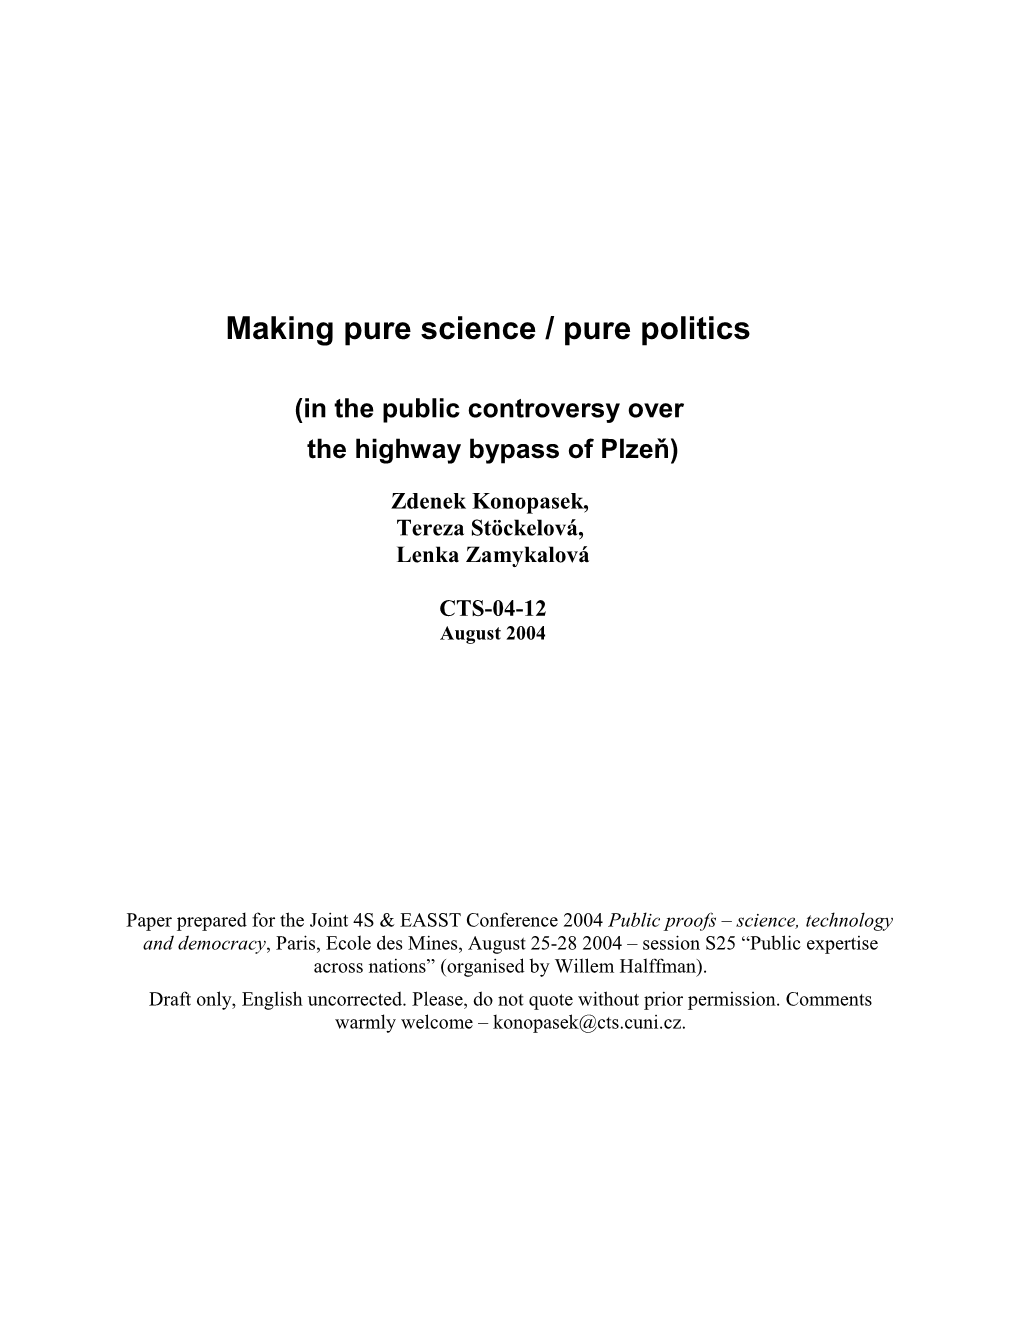 Making Pure Science / Pure Politics in the Public Controversy Over the Highway By-Pass of Plzen